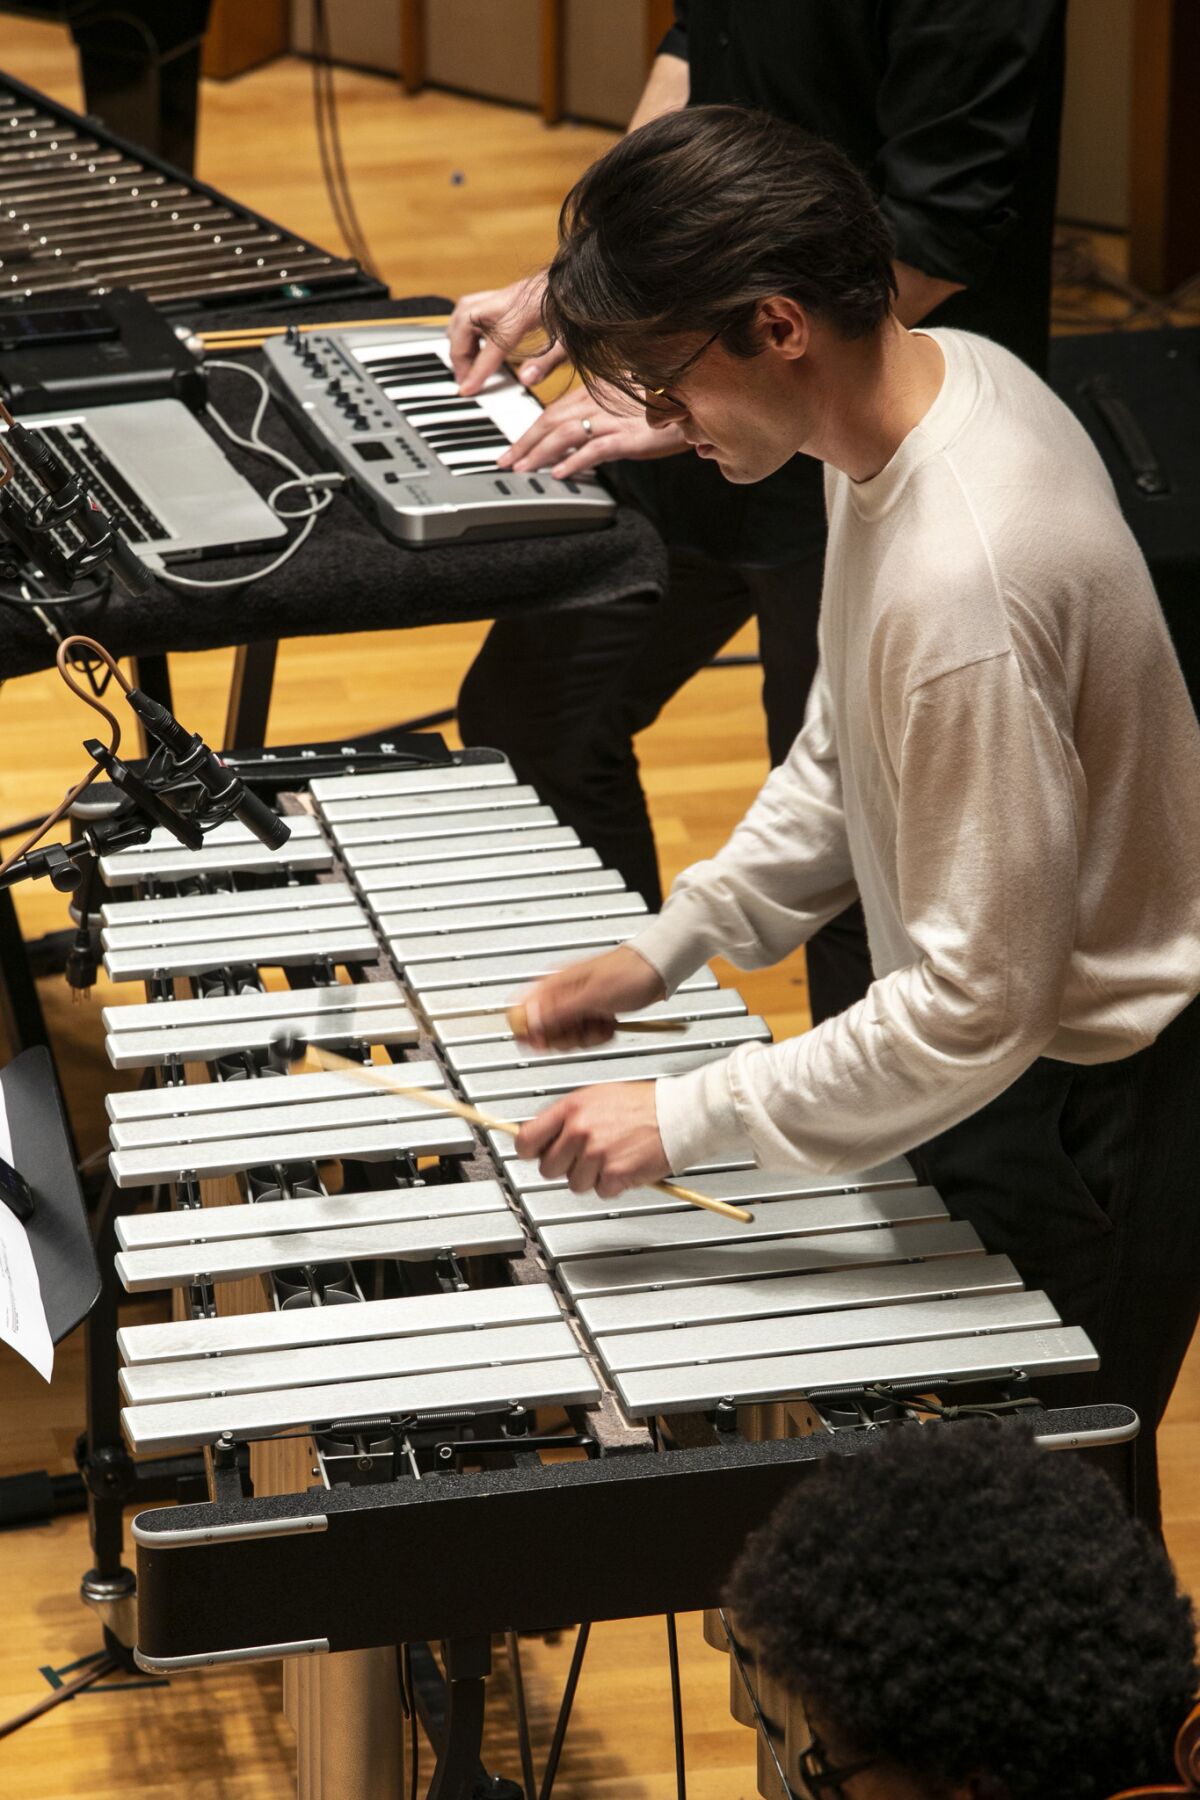 Led by Monday Evening Concerts artistic director Jonathan Hepfer, above, on vibraphone, an ensemble performed Julius Eastman's "Femenine (1974) at downtown L.A.'s Zipper Concert Hall.